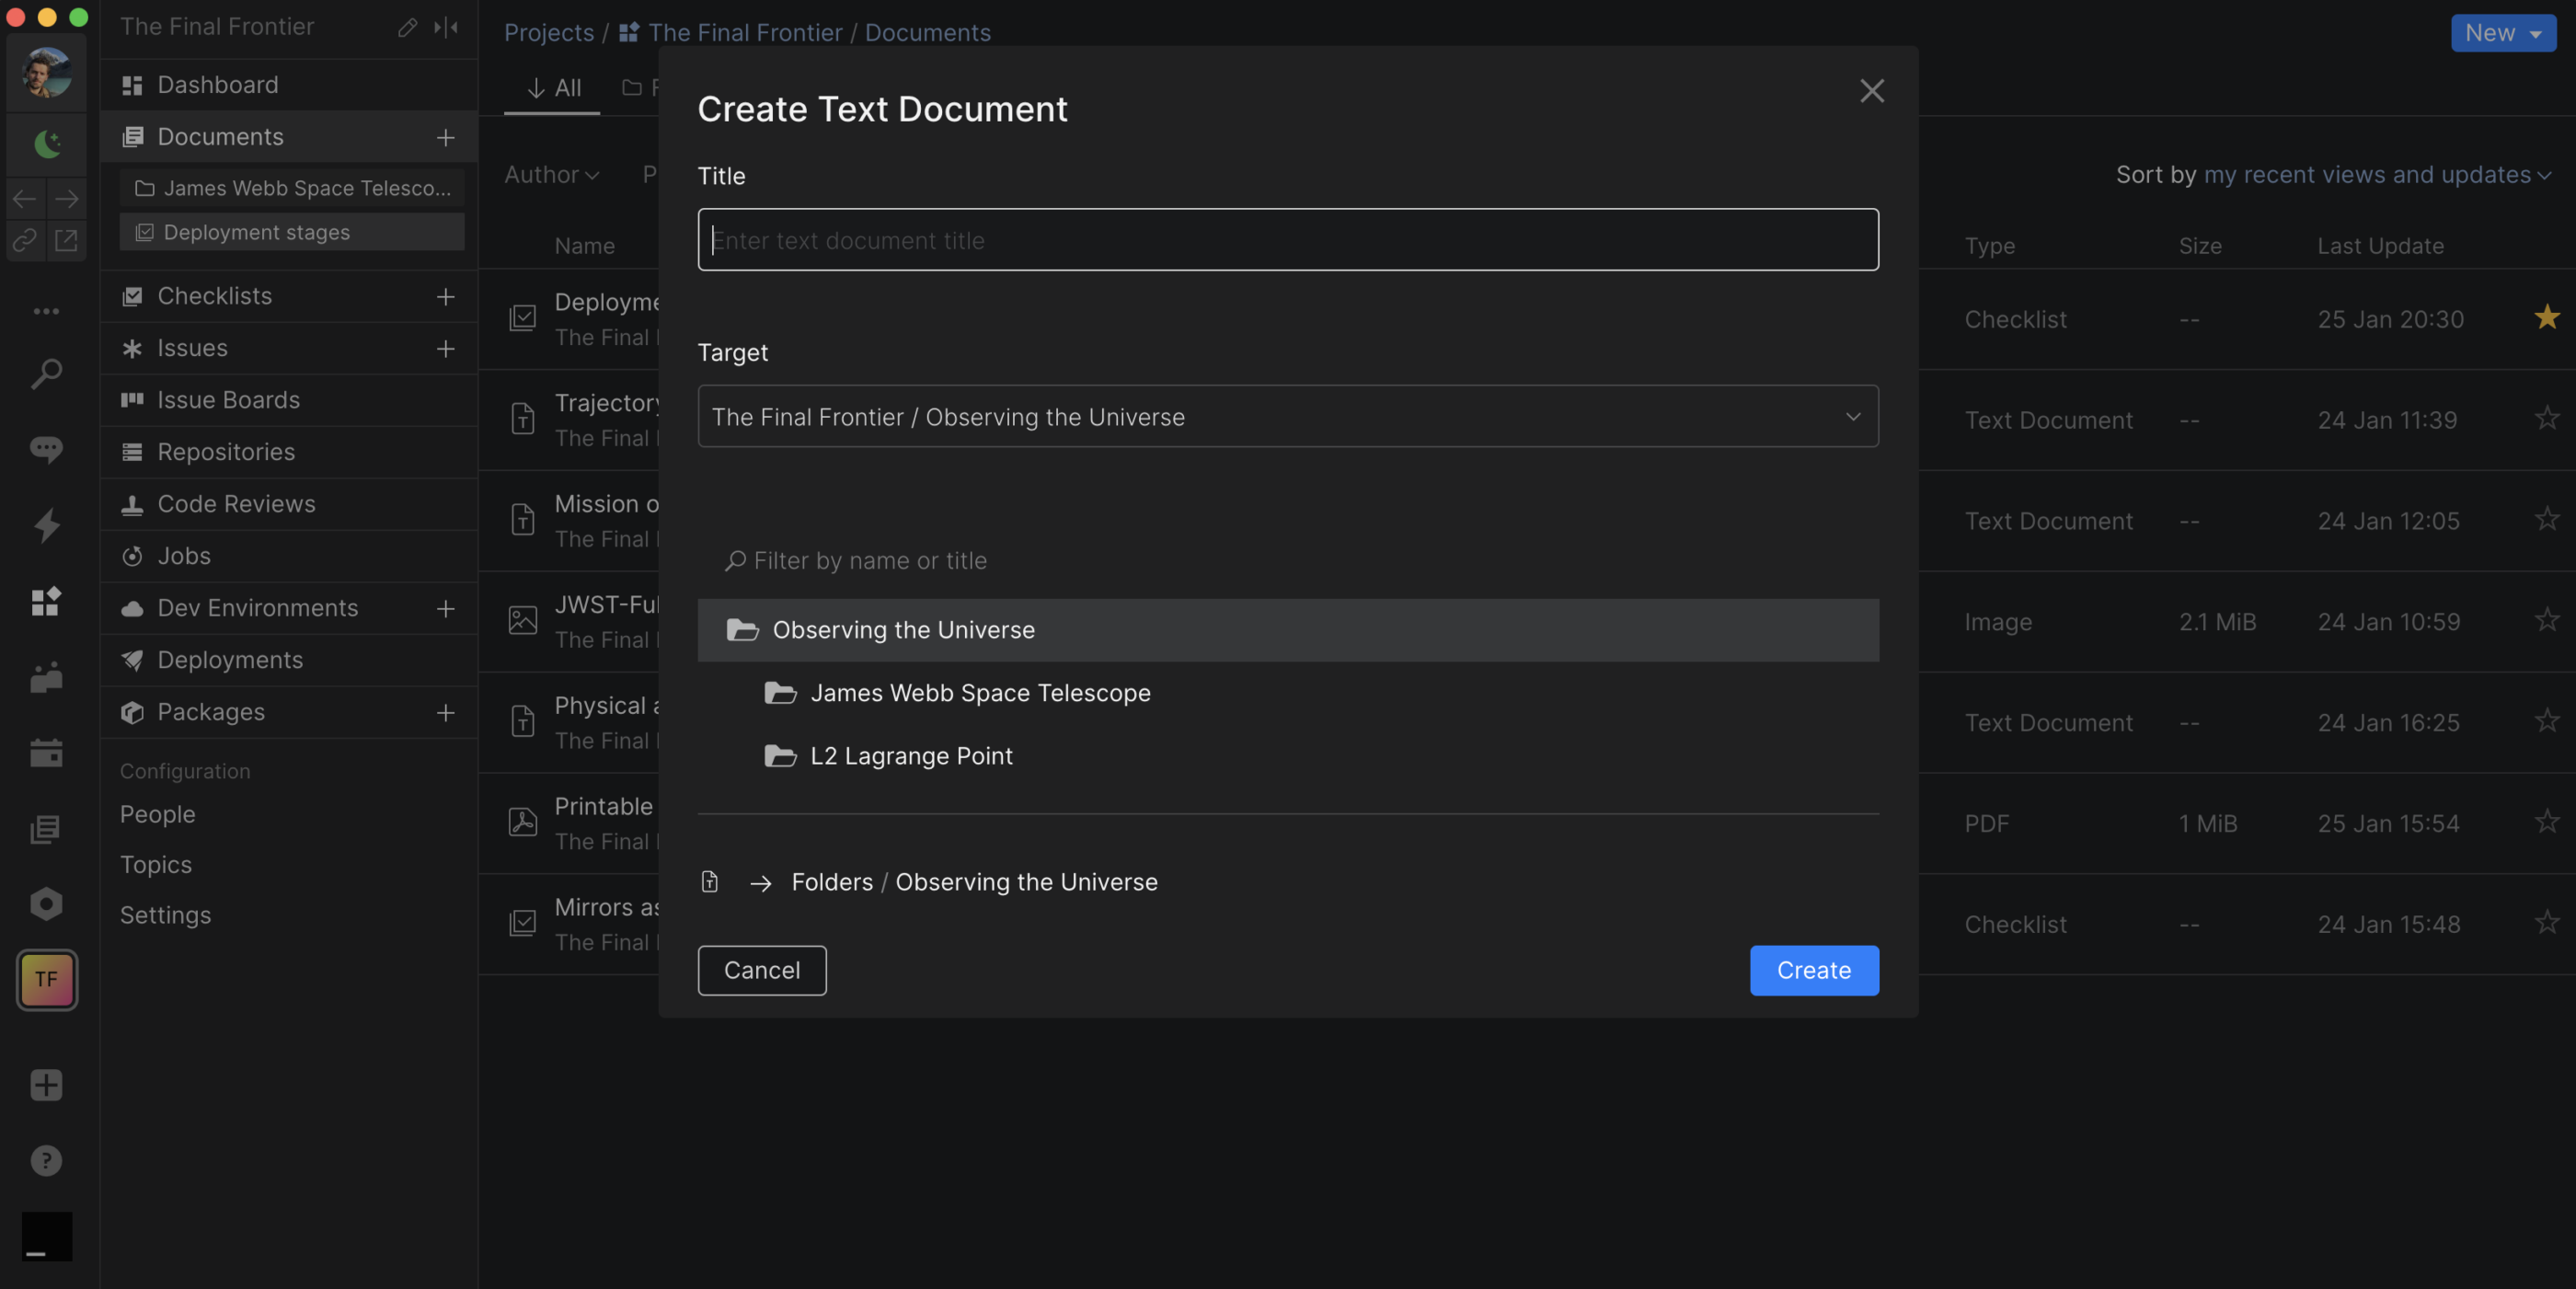 Creating new entities from within the project keeps them in its Documents by default.